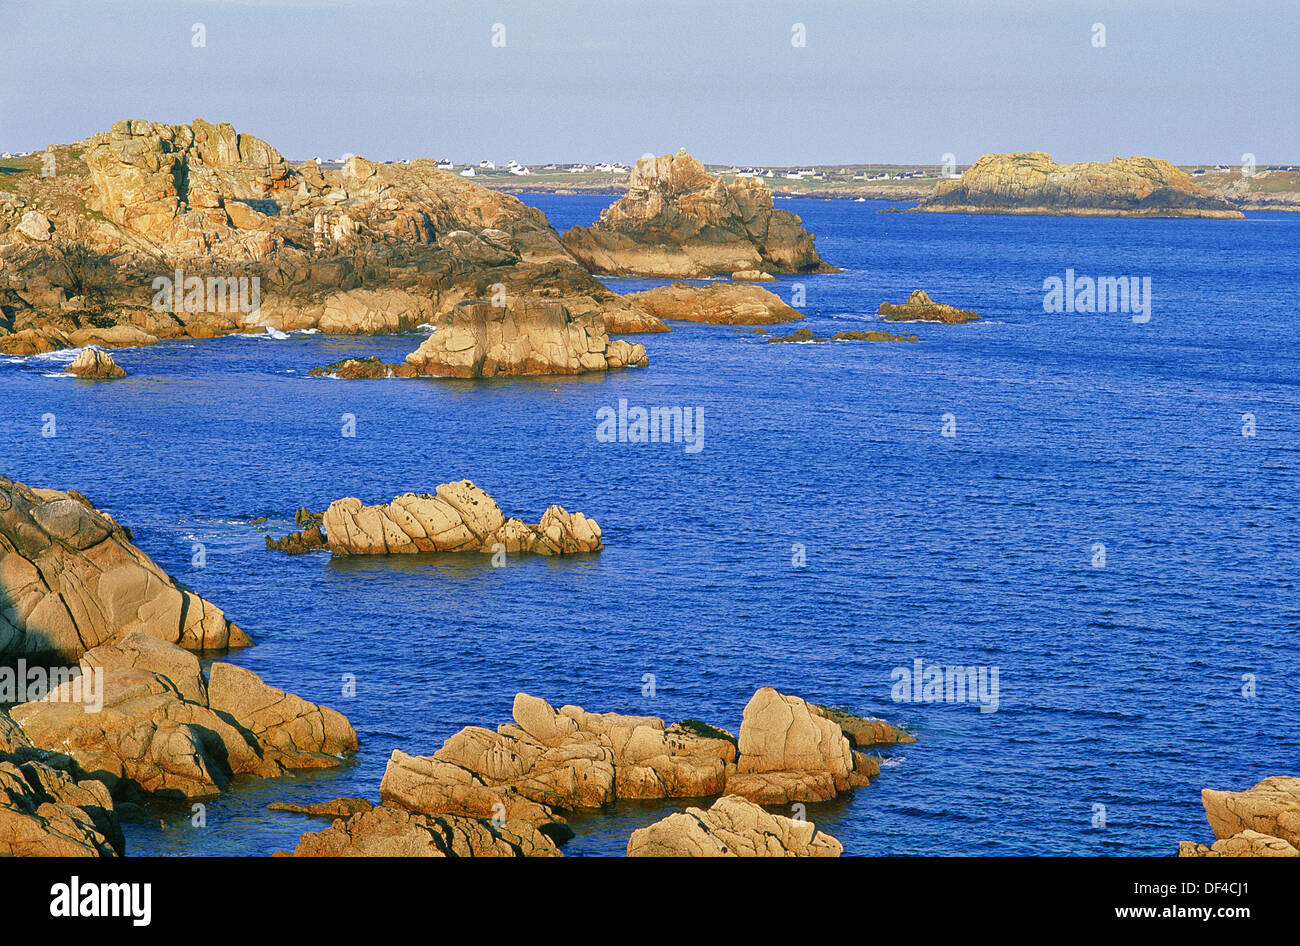 Lampaul Bay, Island of Ouessant, Finistère, Brittany, Atlantic Coast, France Stock Photo